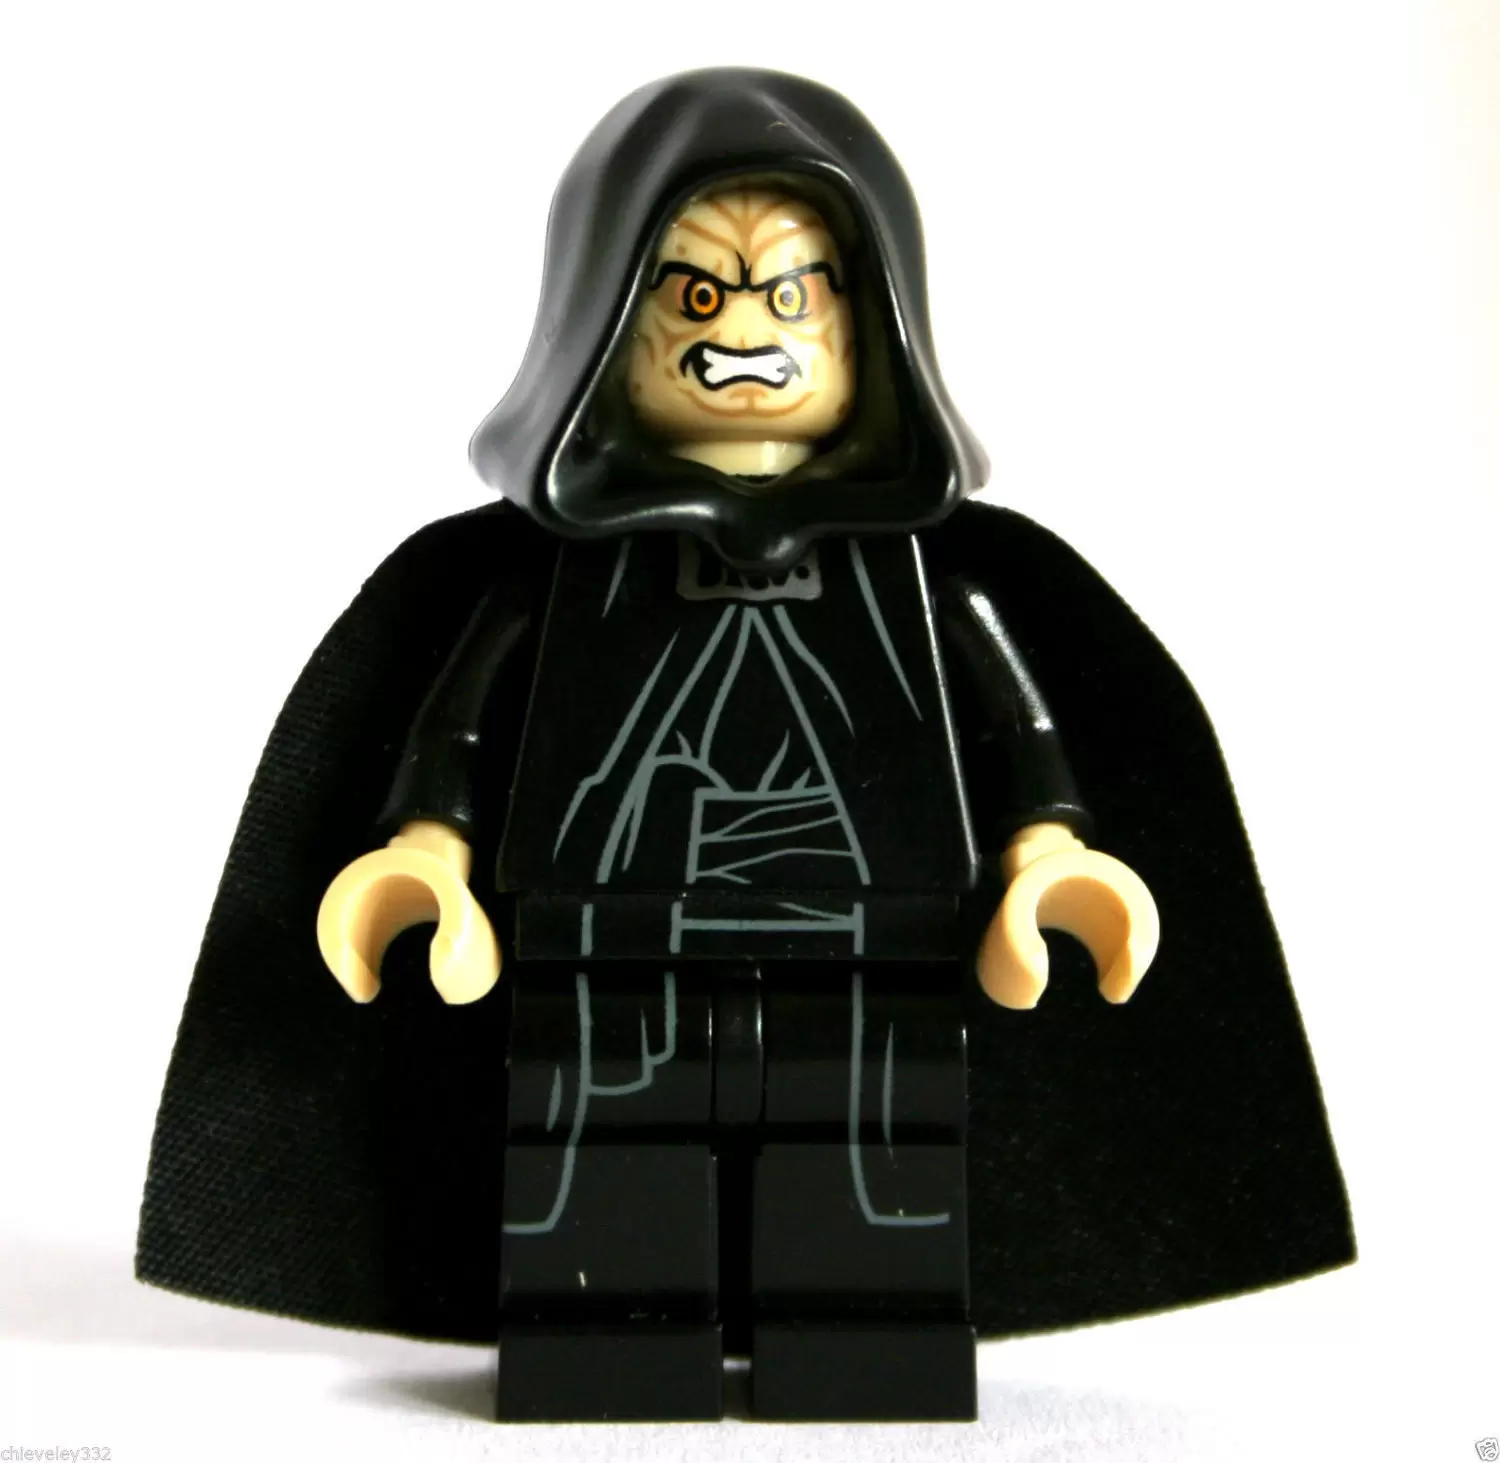 Minifigurines LEGO Star Wars - Emperor Palpatine as Darth Sidious with Tan head and hands